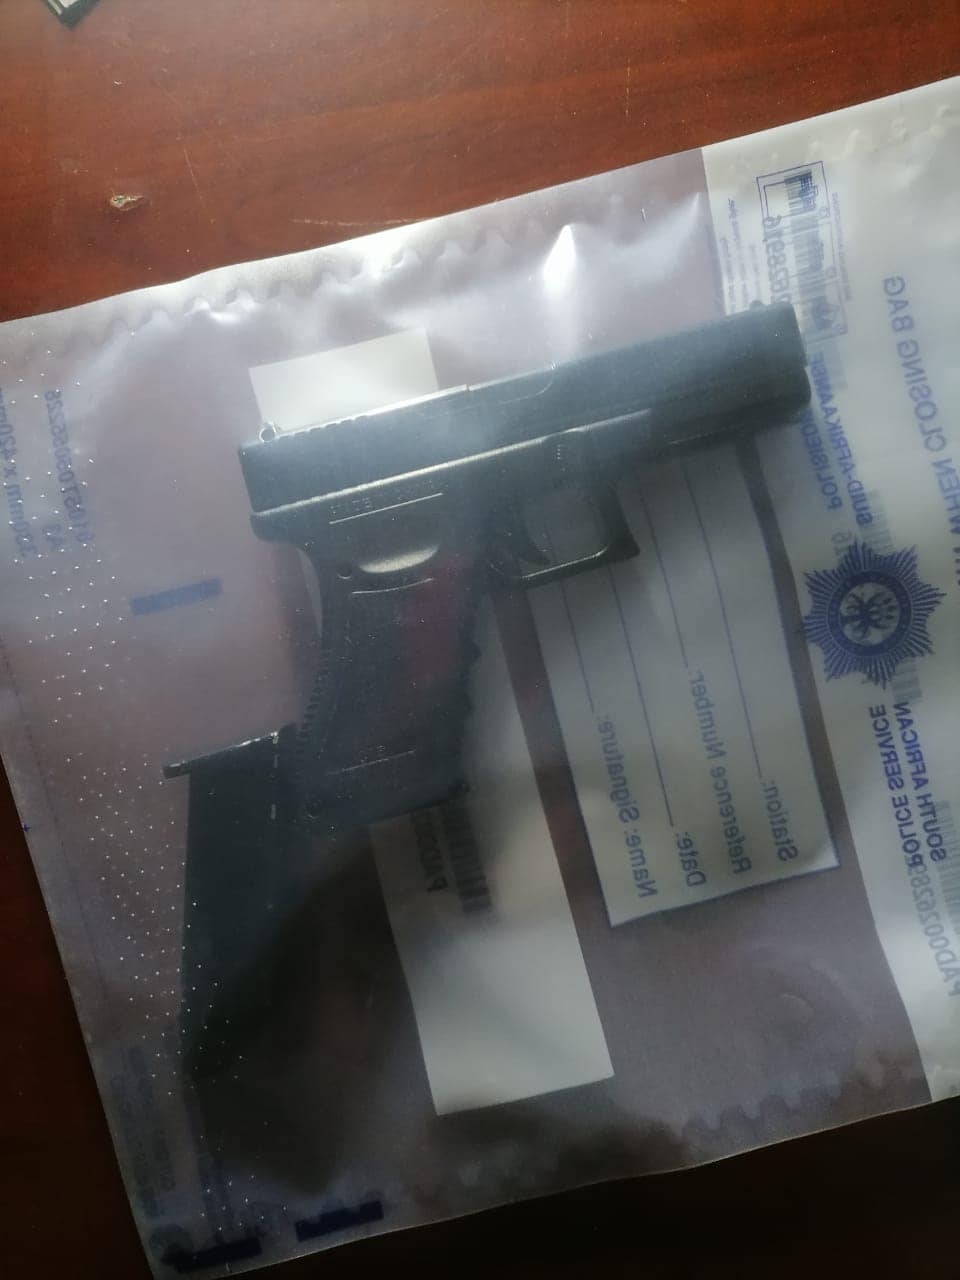 An unlicensed firearm recovered, and a 23-year-old perpetrator was arrested in the Vosloorus area